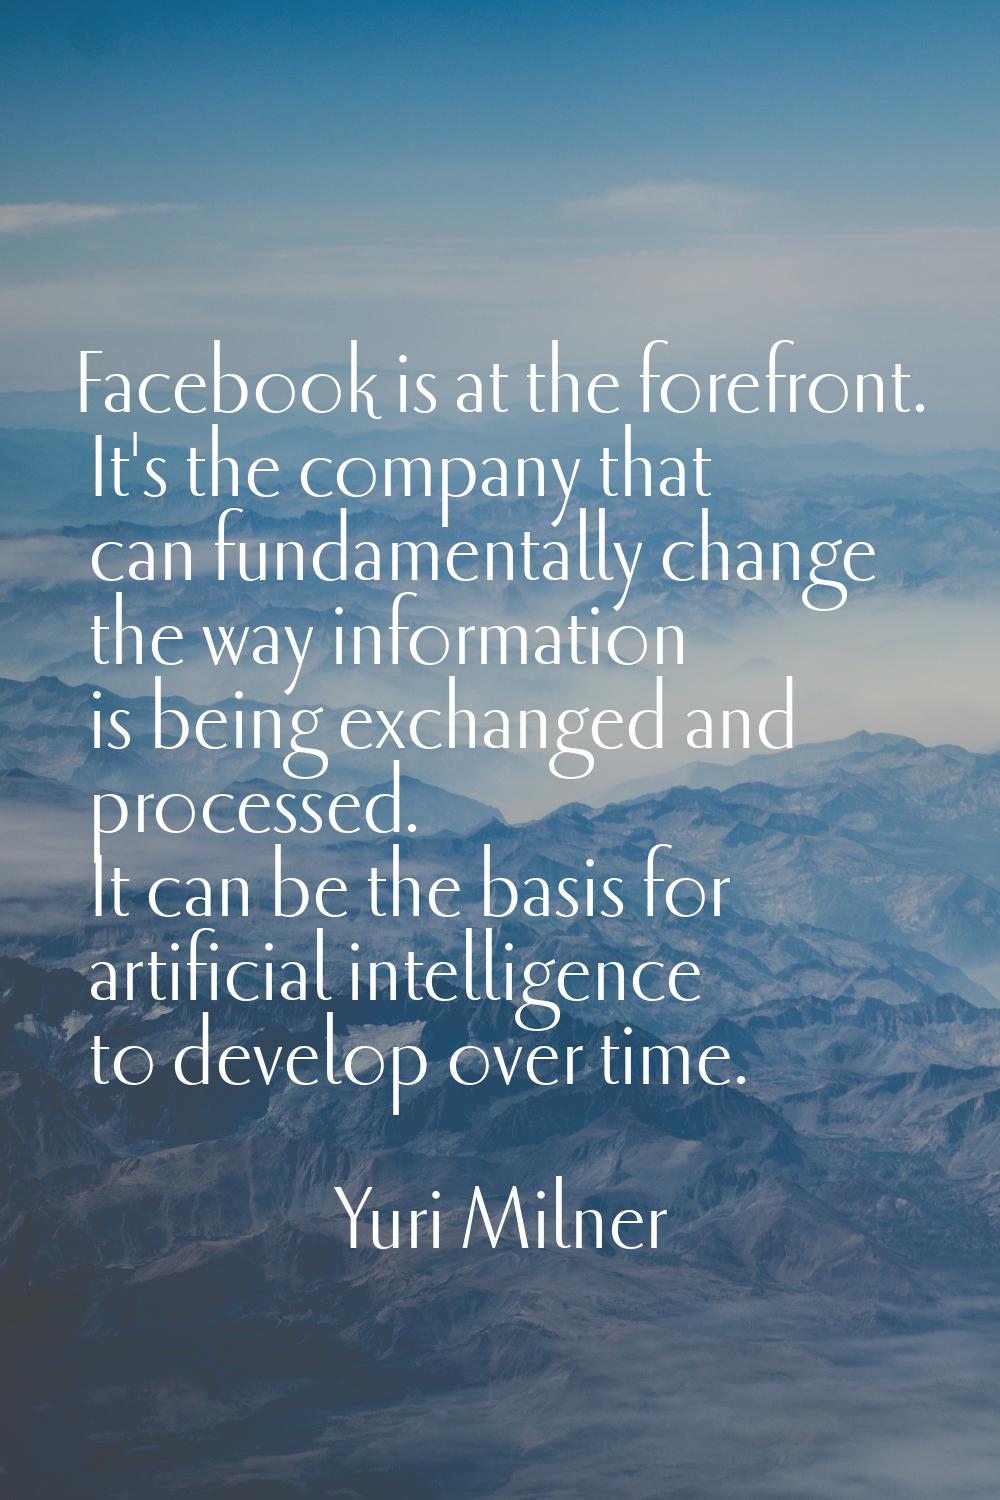 Facebook is at the forefront. It's the company that can fundamentally change the way information is